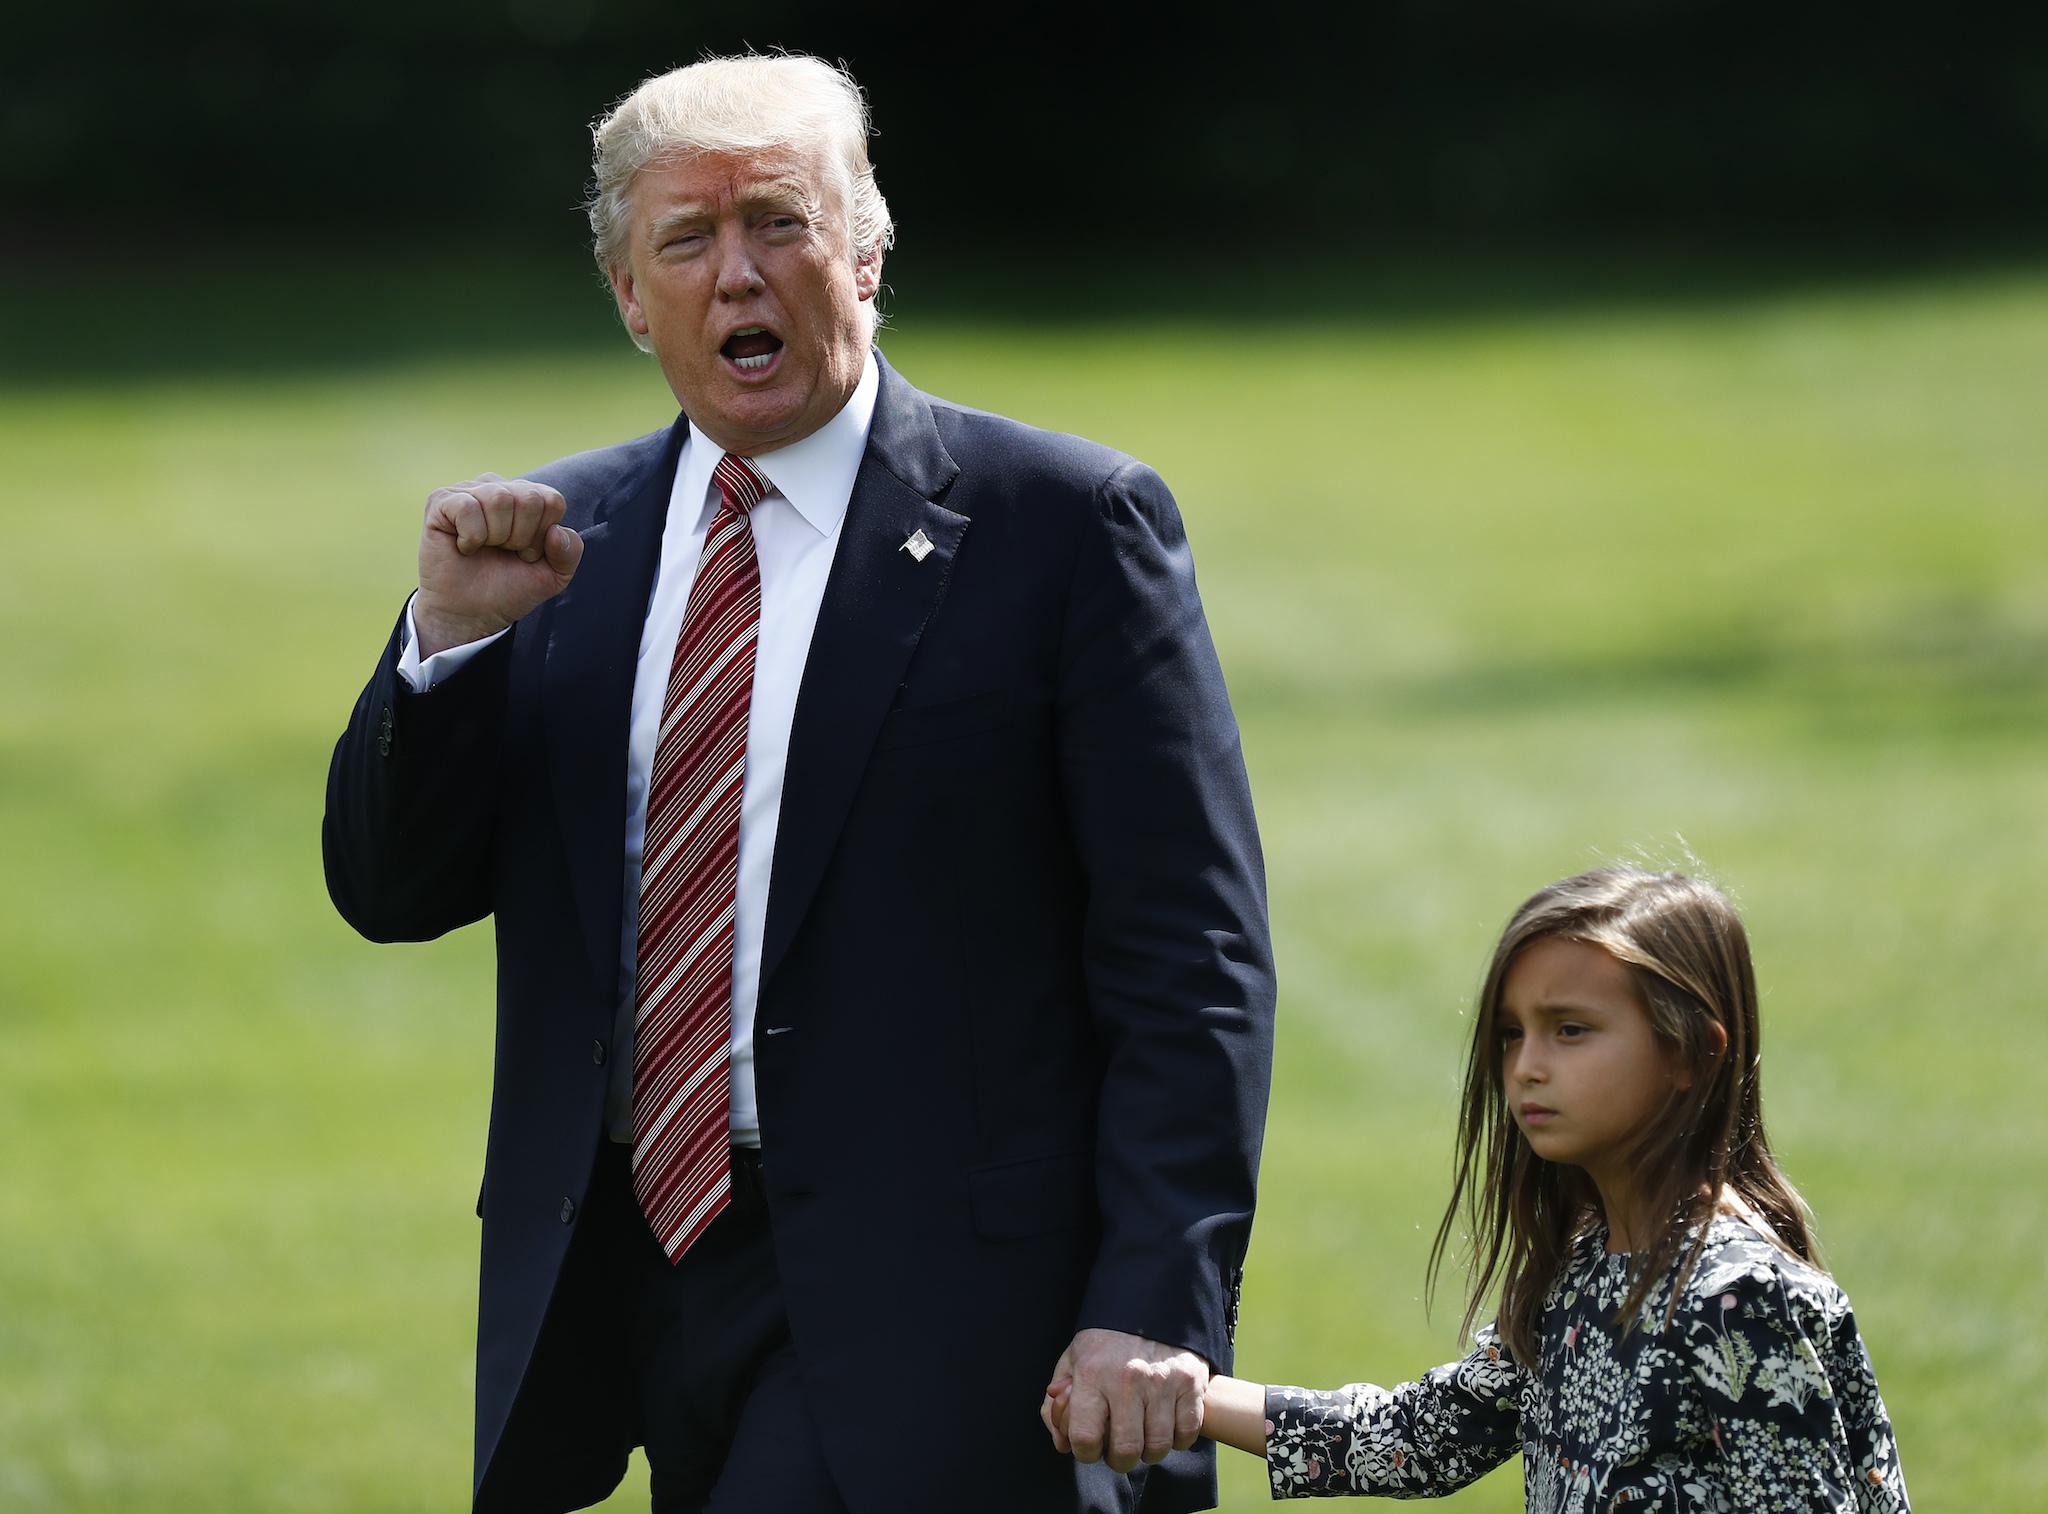 President Donald Trump gestures to the media as he walks with his granddaughter Arabella Kushner